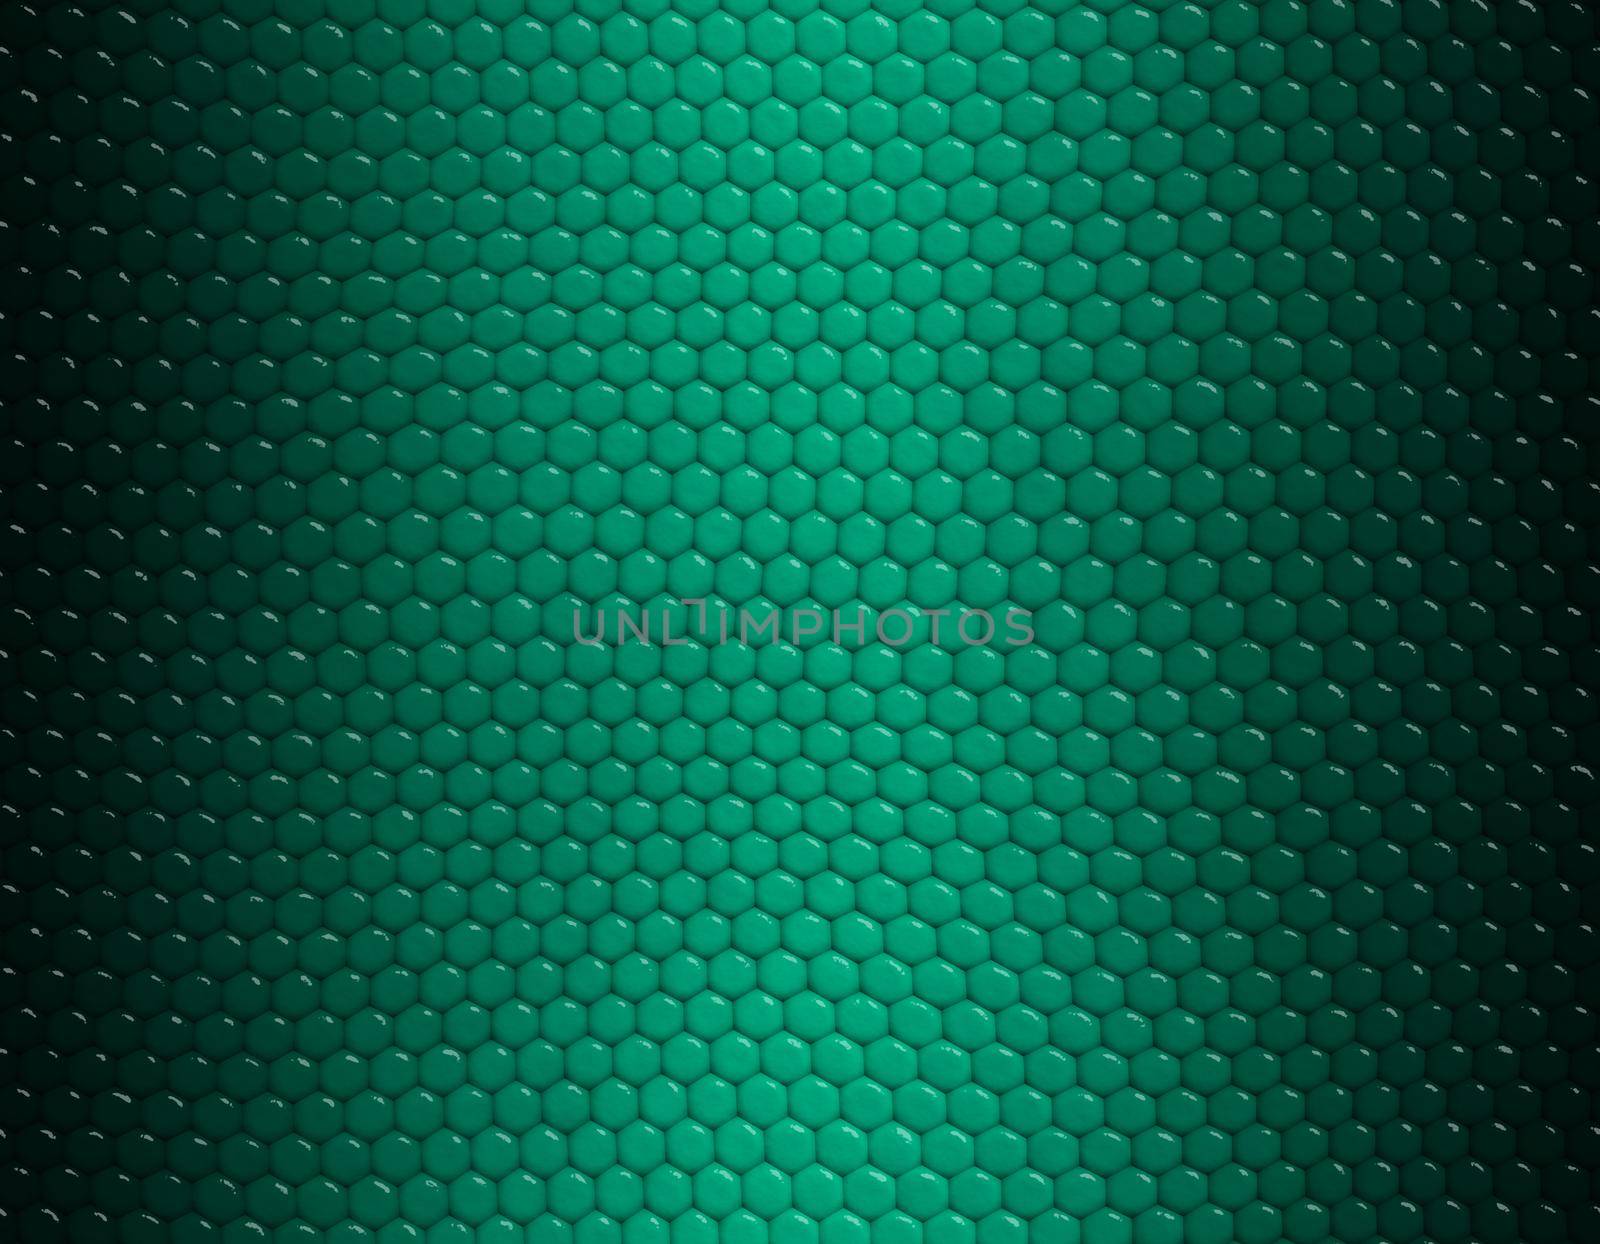 Emerald and green gradient snake skin pattern, hexagonal scale by Bezdnatm